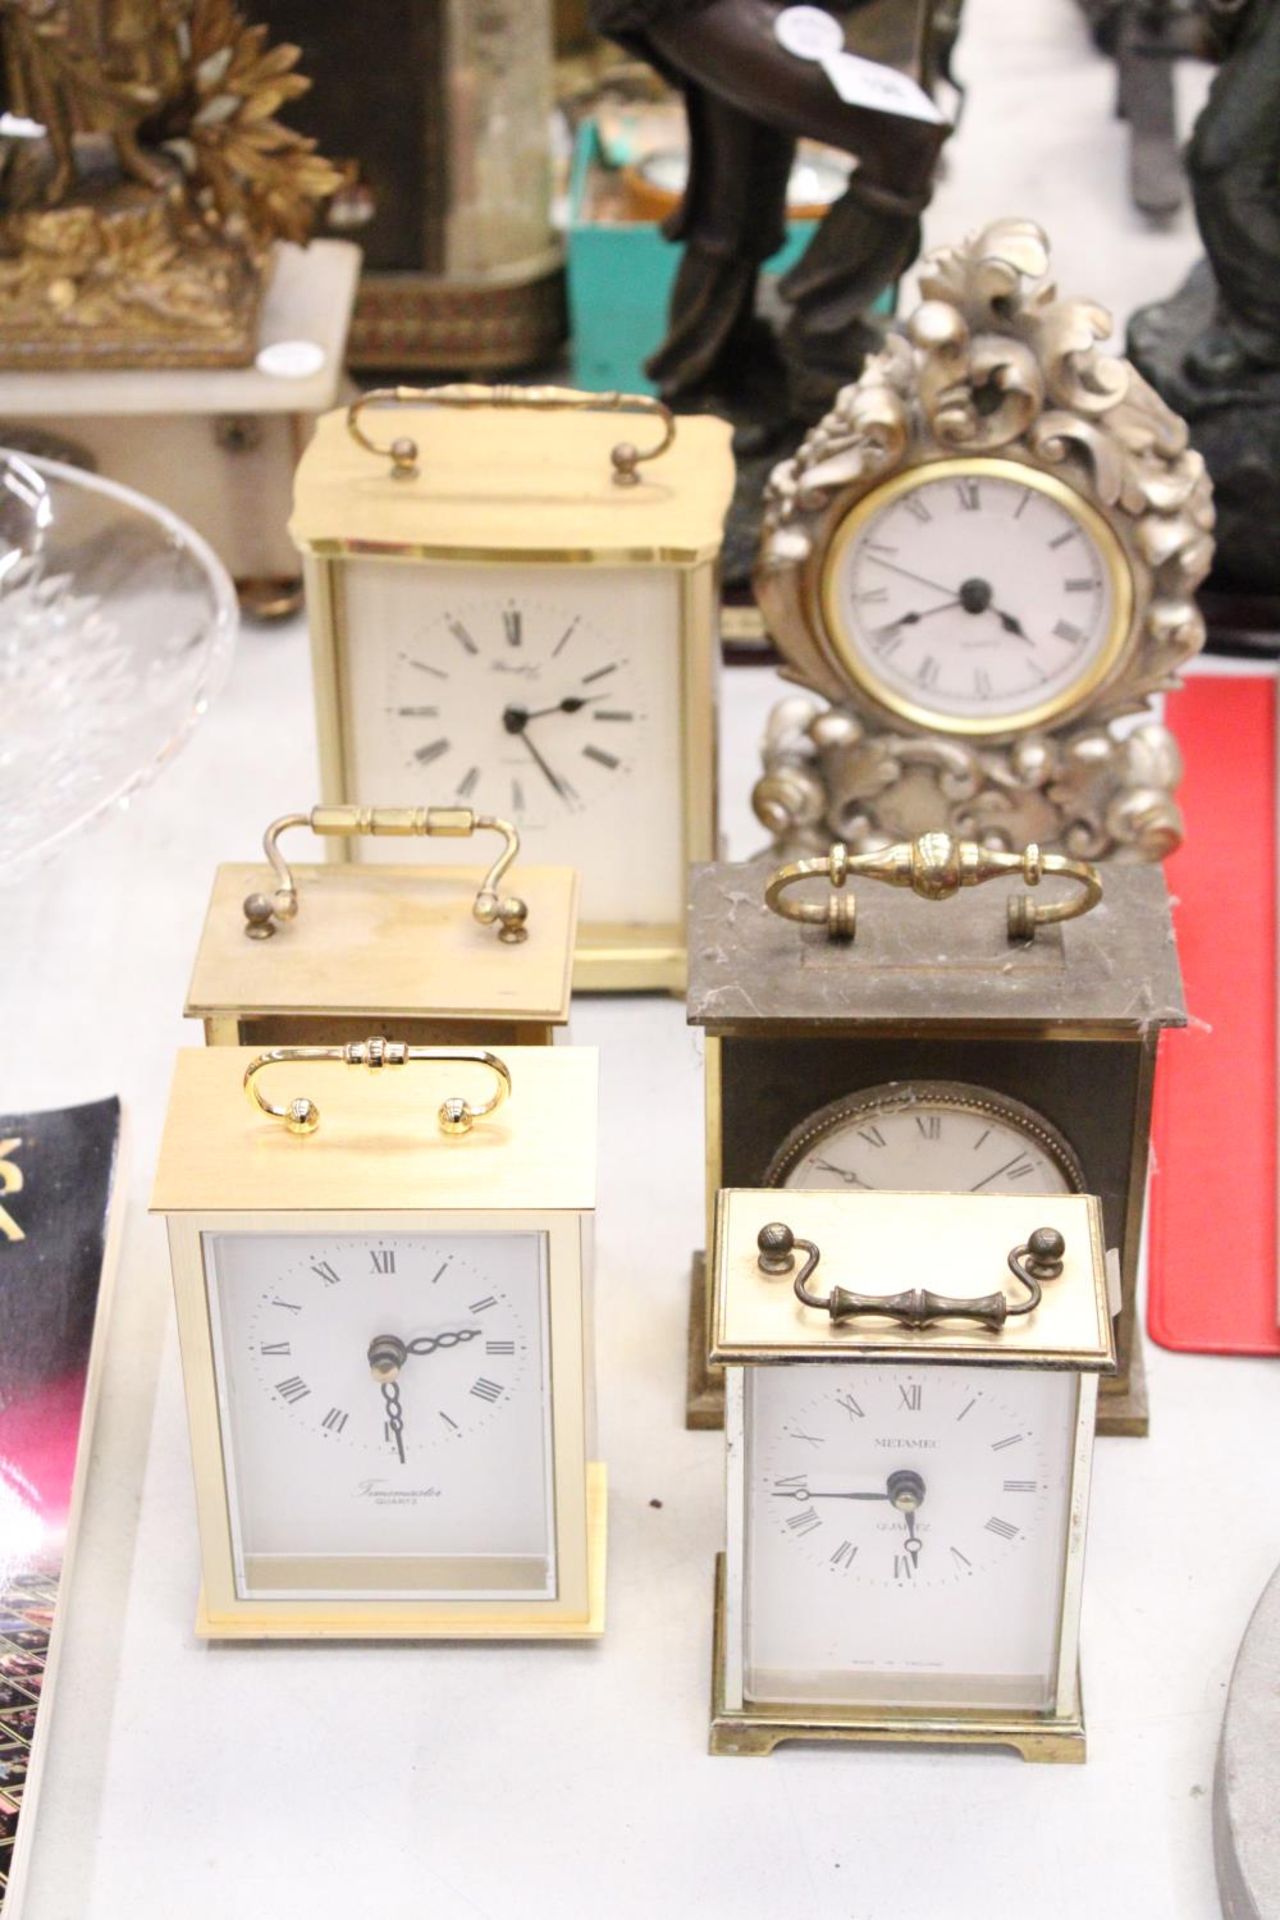 SIX MANTLE CLOCKS TO INCLUDE FIVE CARRIAGE CLOCKS